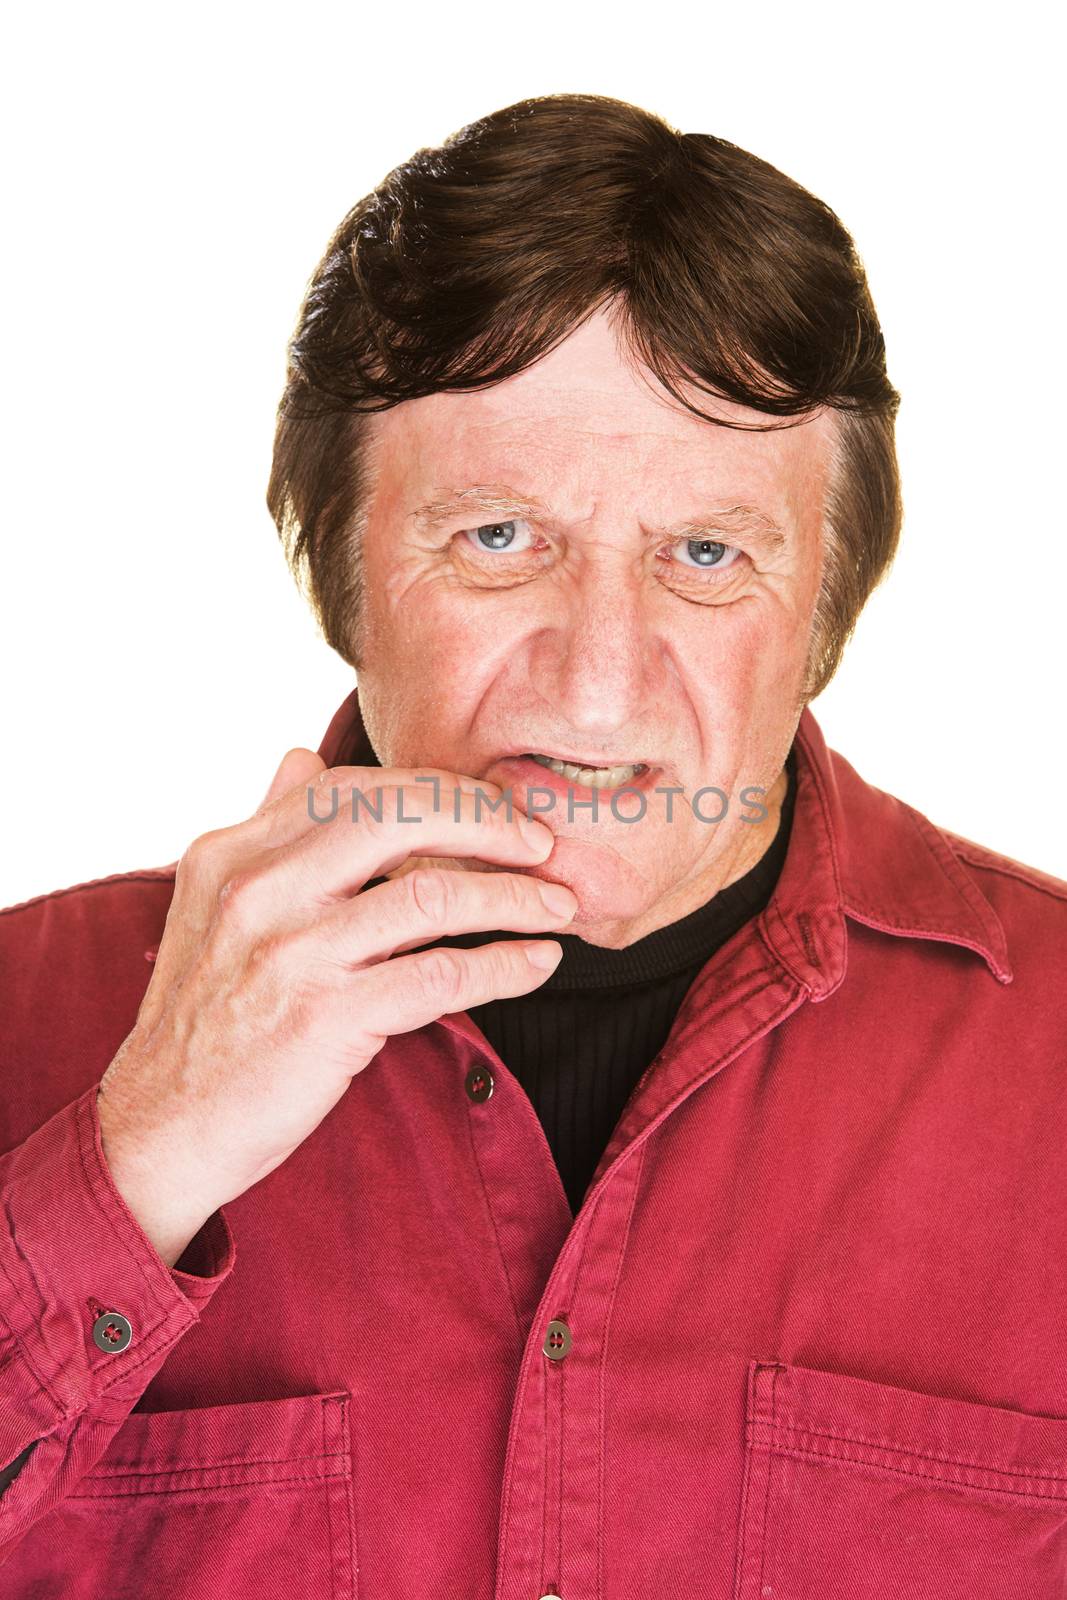 Single isolated perplexed man in red shirt